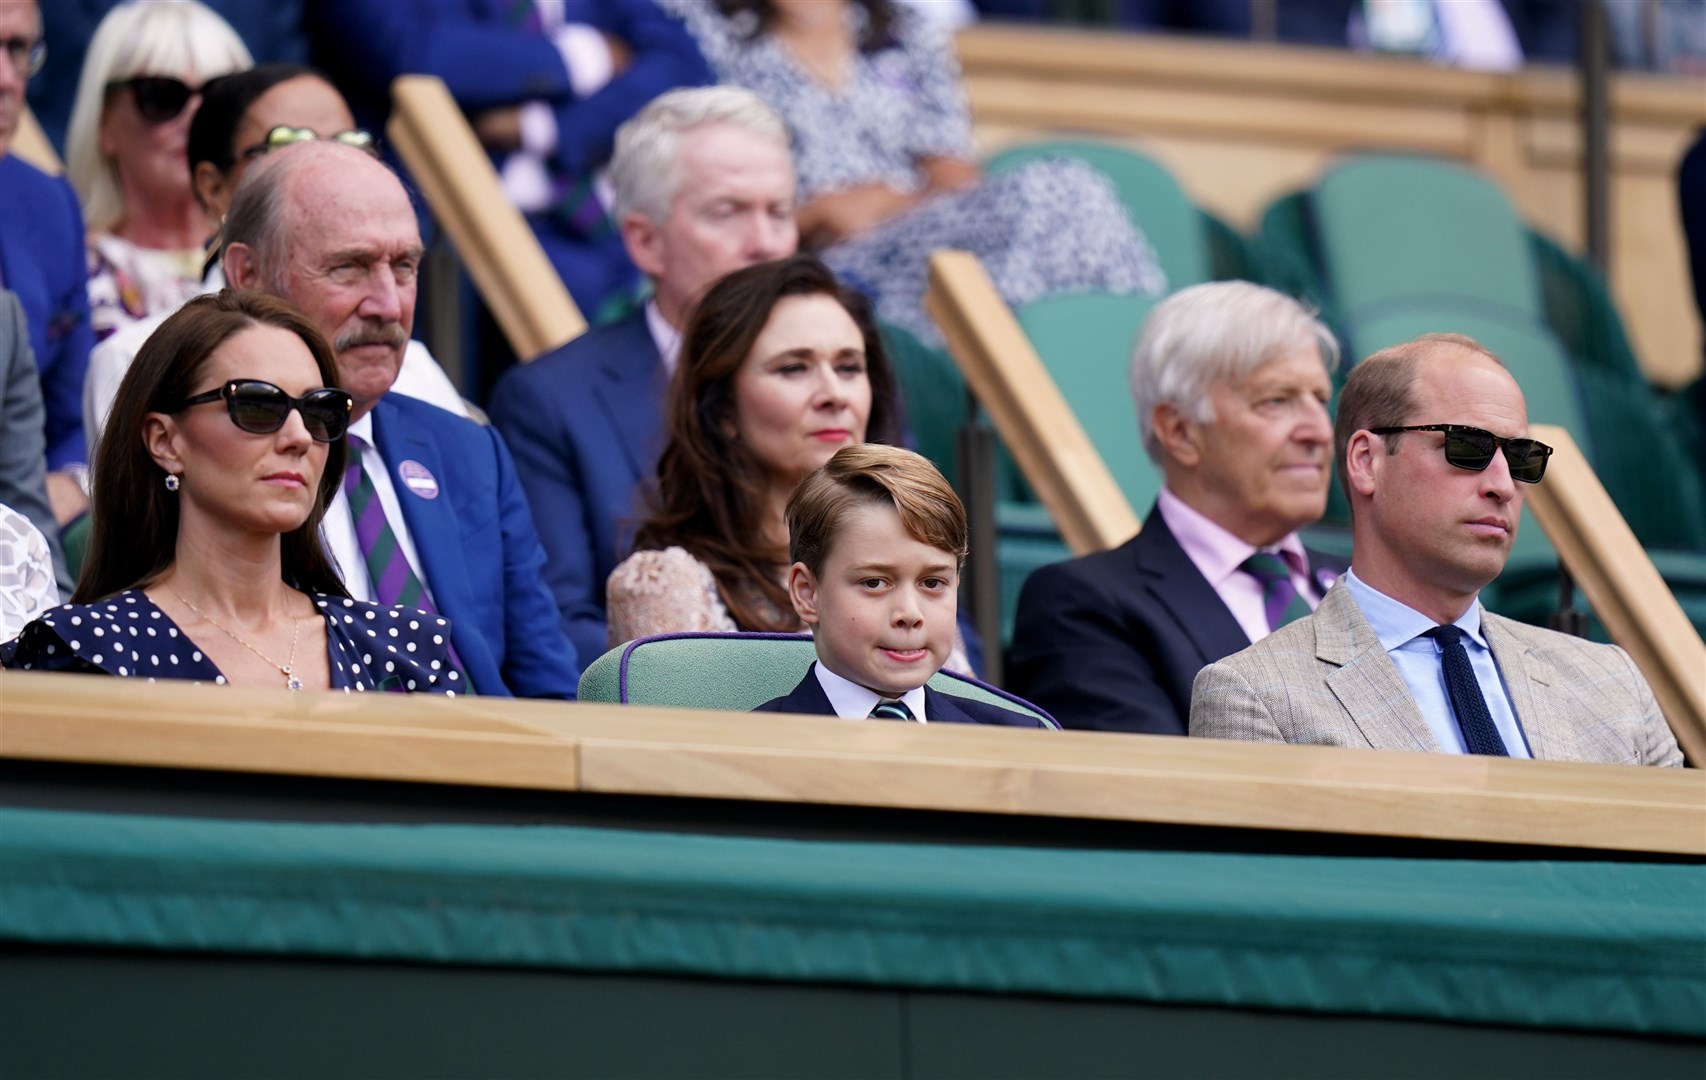 The Duke and Duchess of Cambridge with Prince George in the Royal Box at Wimbledon during the men’s final (Adam Davy/PA)